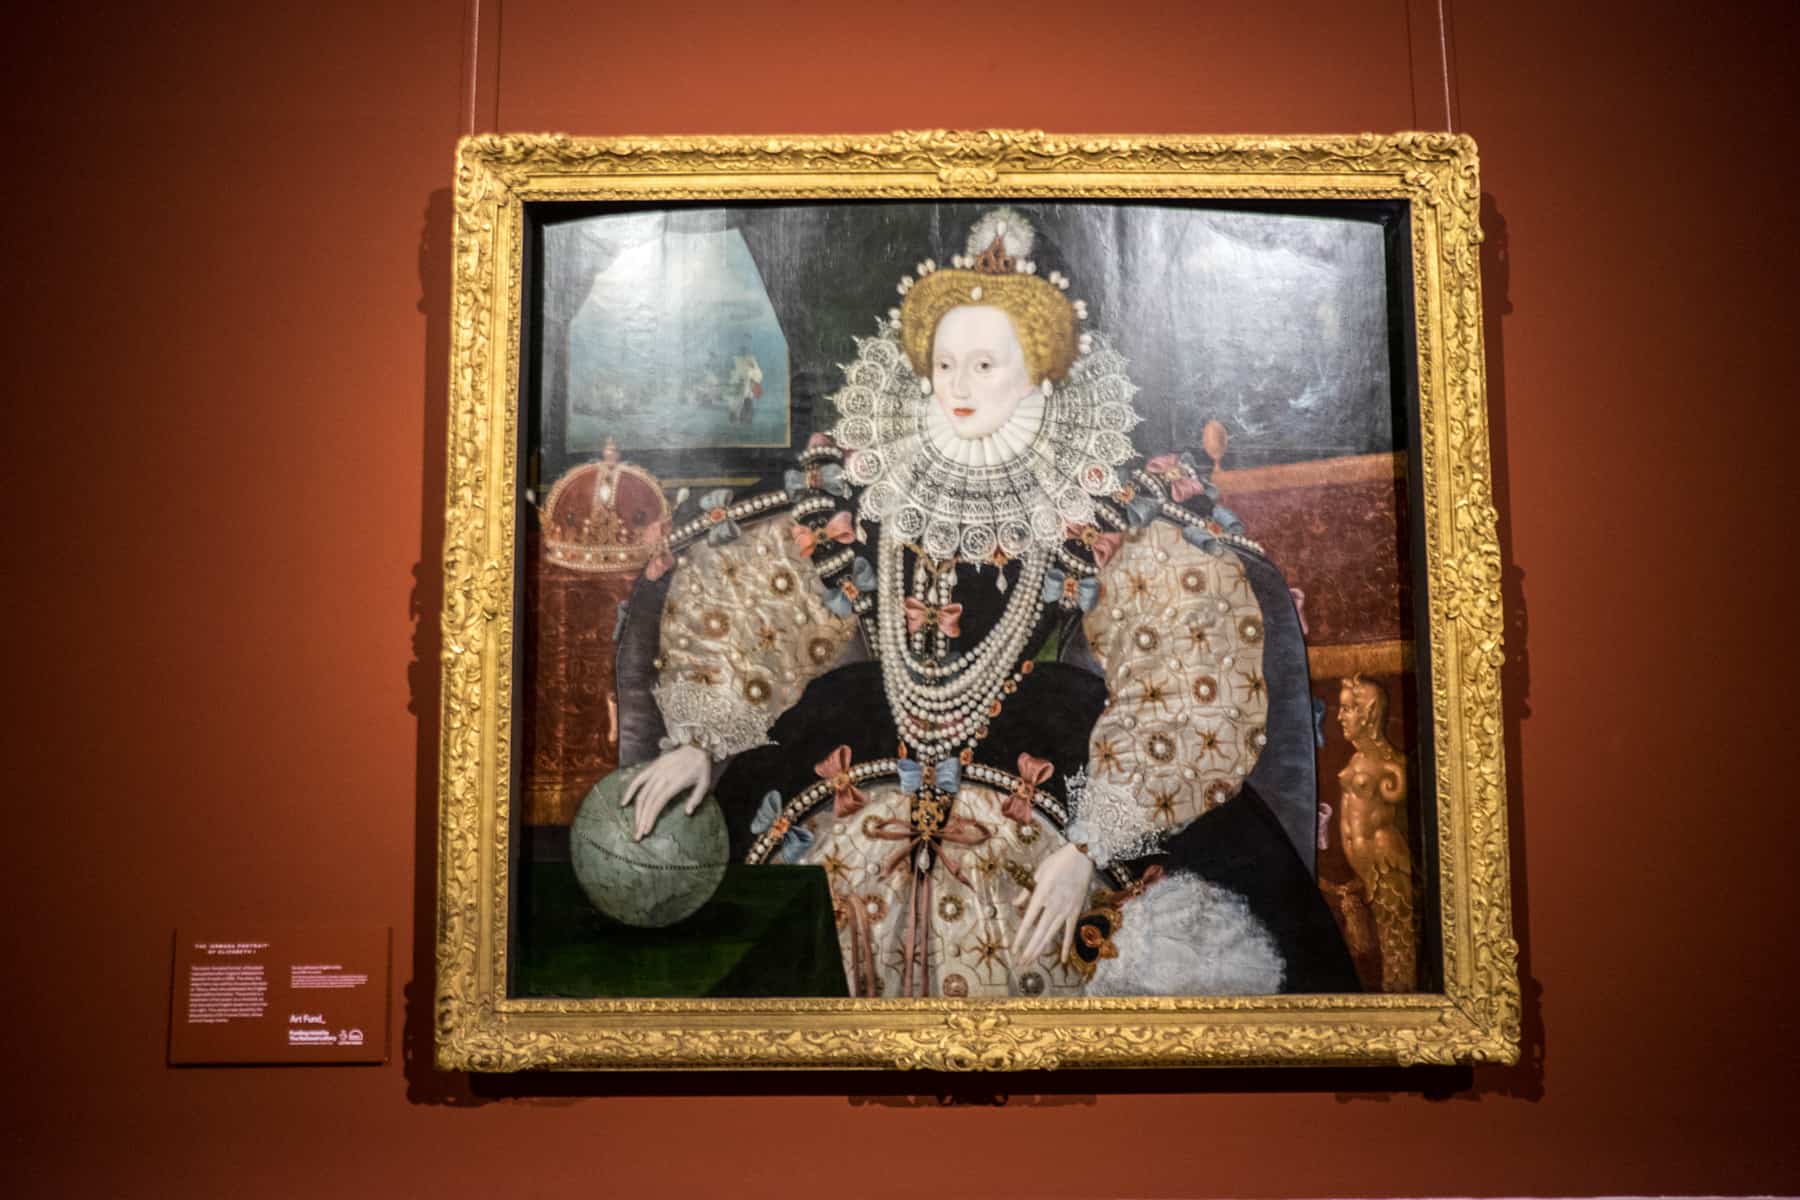 The famed ‘Armada Portrait’ of Elizabeth I on display with a gold frame on a red wall inside the Queen's House in Greenwich.